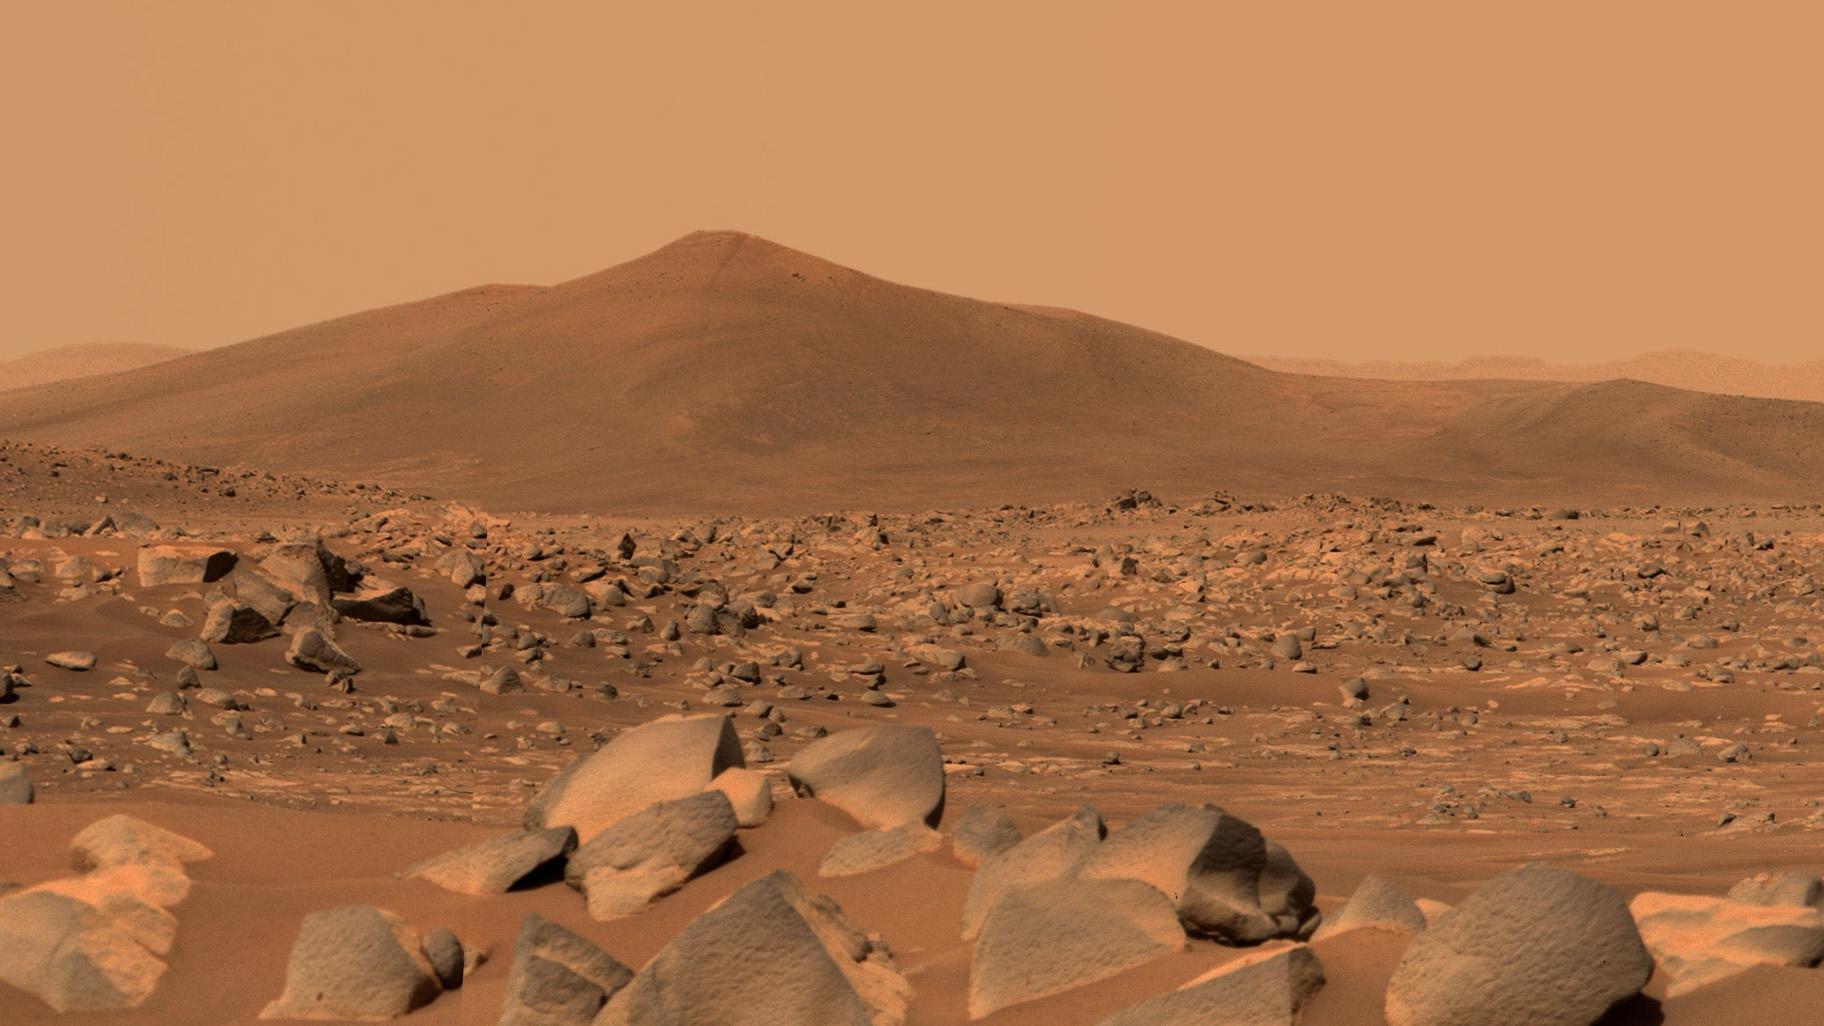 NASA’s Perseverance Mars rover used its dual-camera Mastcam-Z imager to capture this image of “Santa Cruz,” a hill about 1.5 miles away from the rover, on April 29, 2021, the 68th Martian day, or sol, of the mission. The entire scene is inside of Mars’ Jezero Crater; the crater’s rim can be seen on the horizon line beyond the hill. (Credit: NASA / JPL-Caltech / ASU / MSSS)